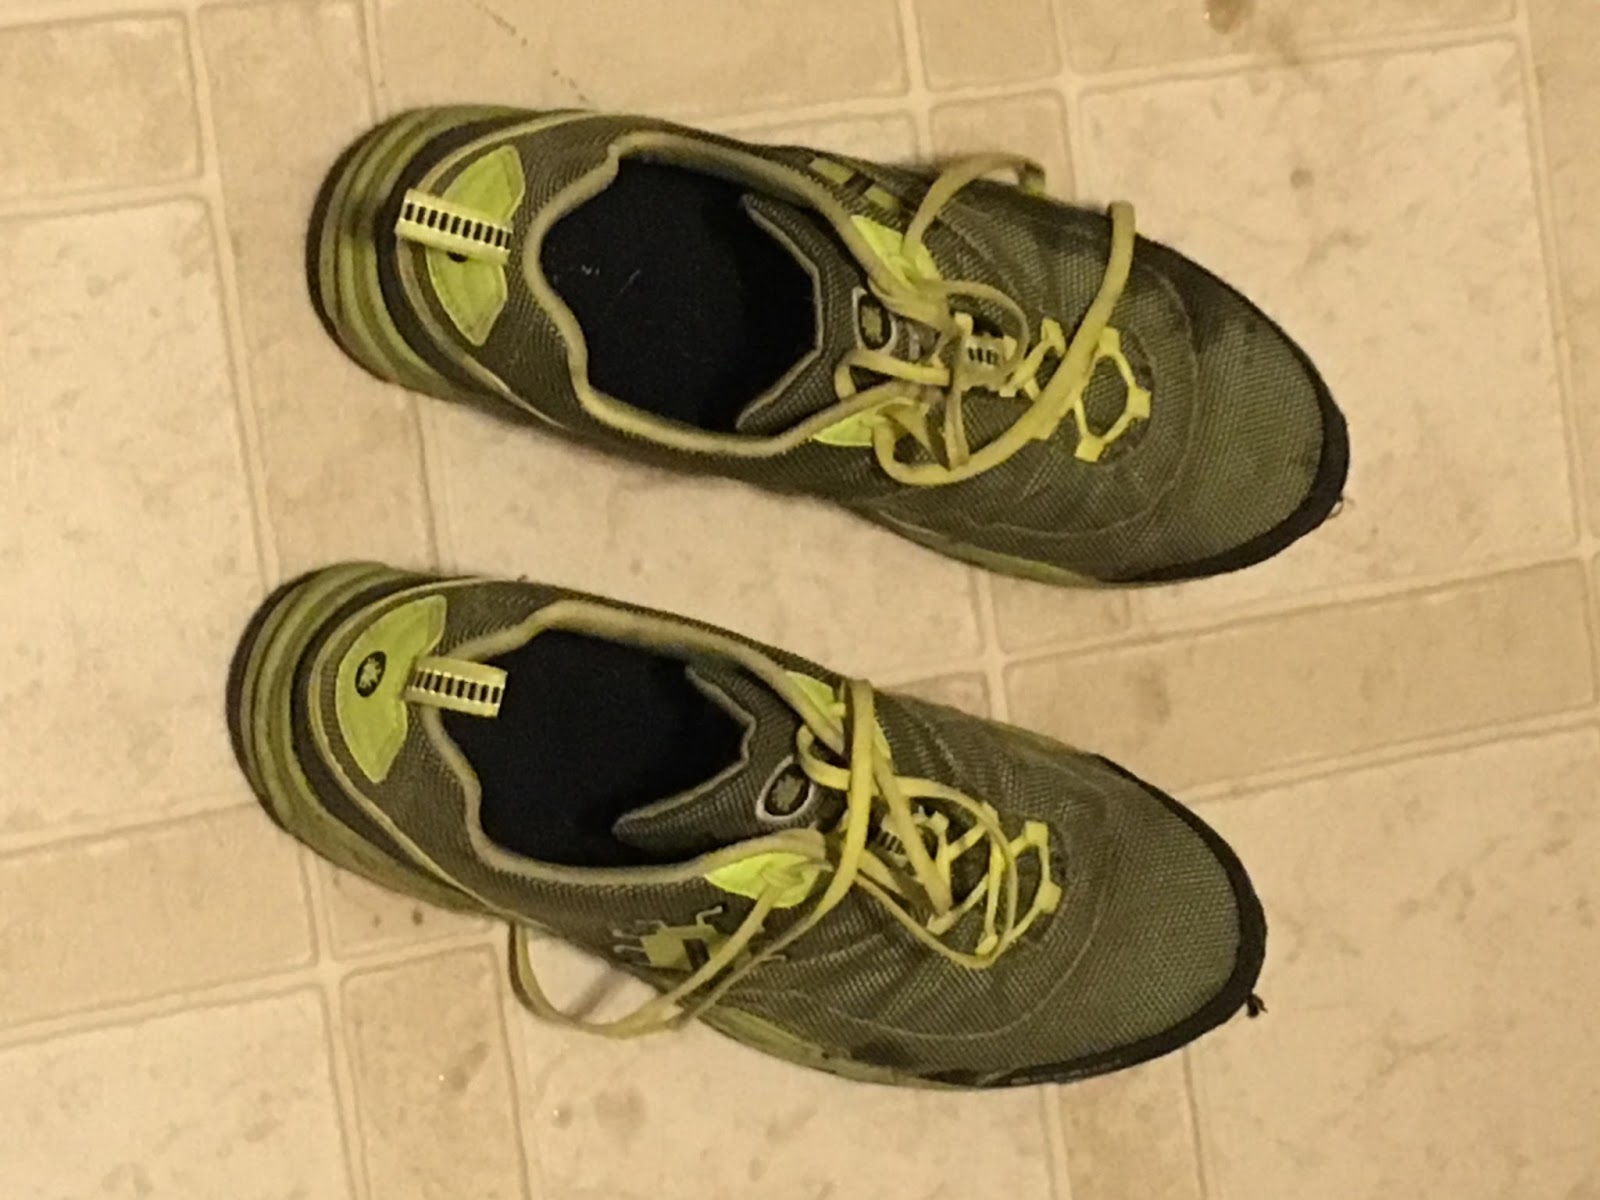 An Ode to Icebug Running Shoes